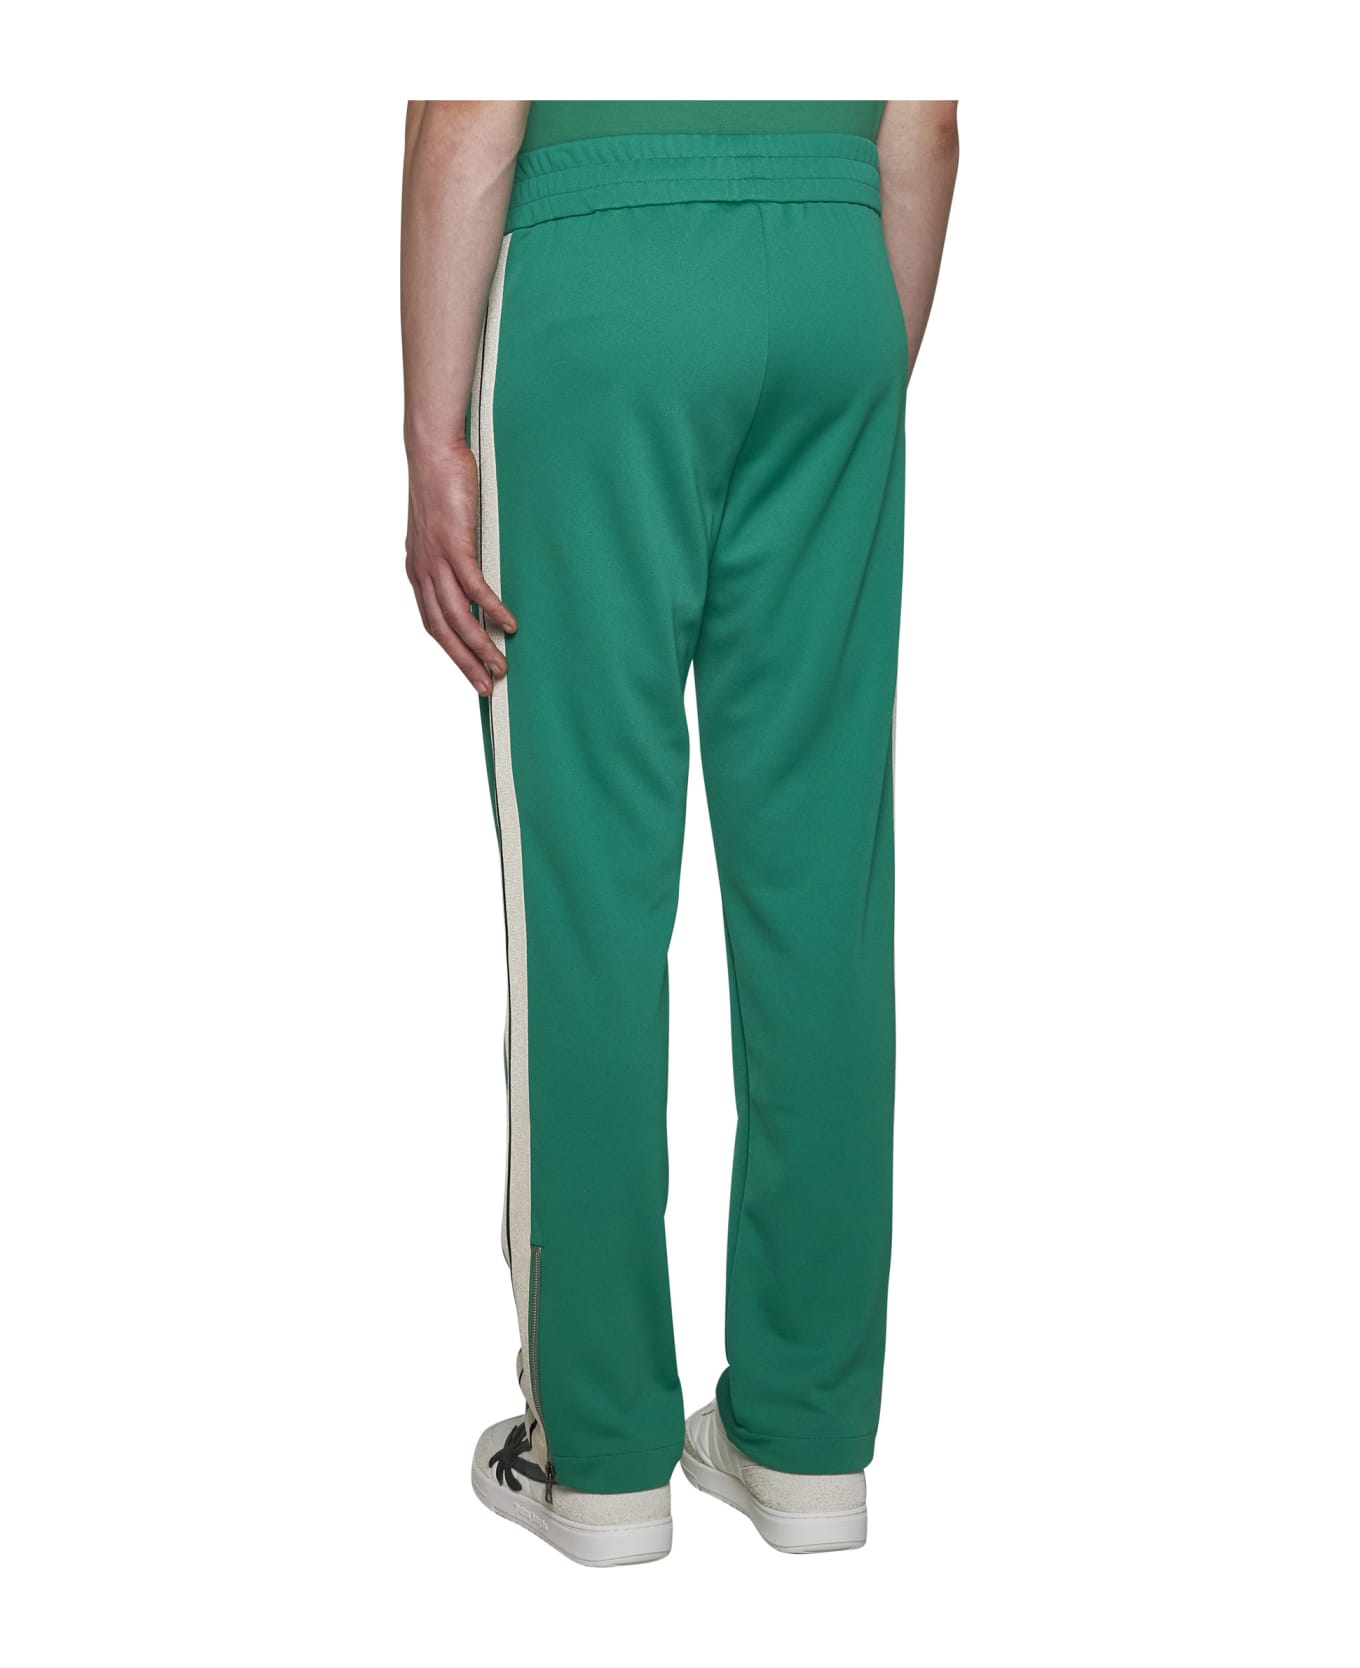 Palm Angels Classic Logo Track Pants - Green off white